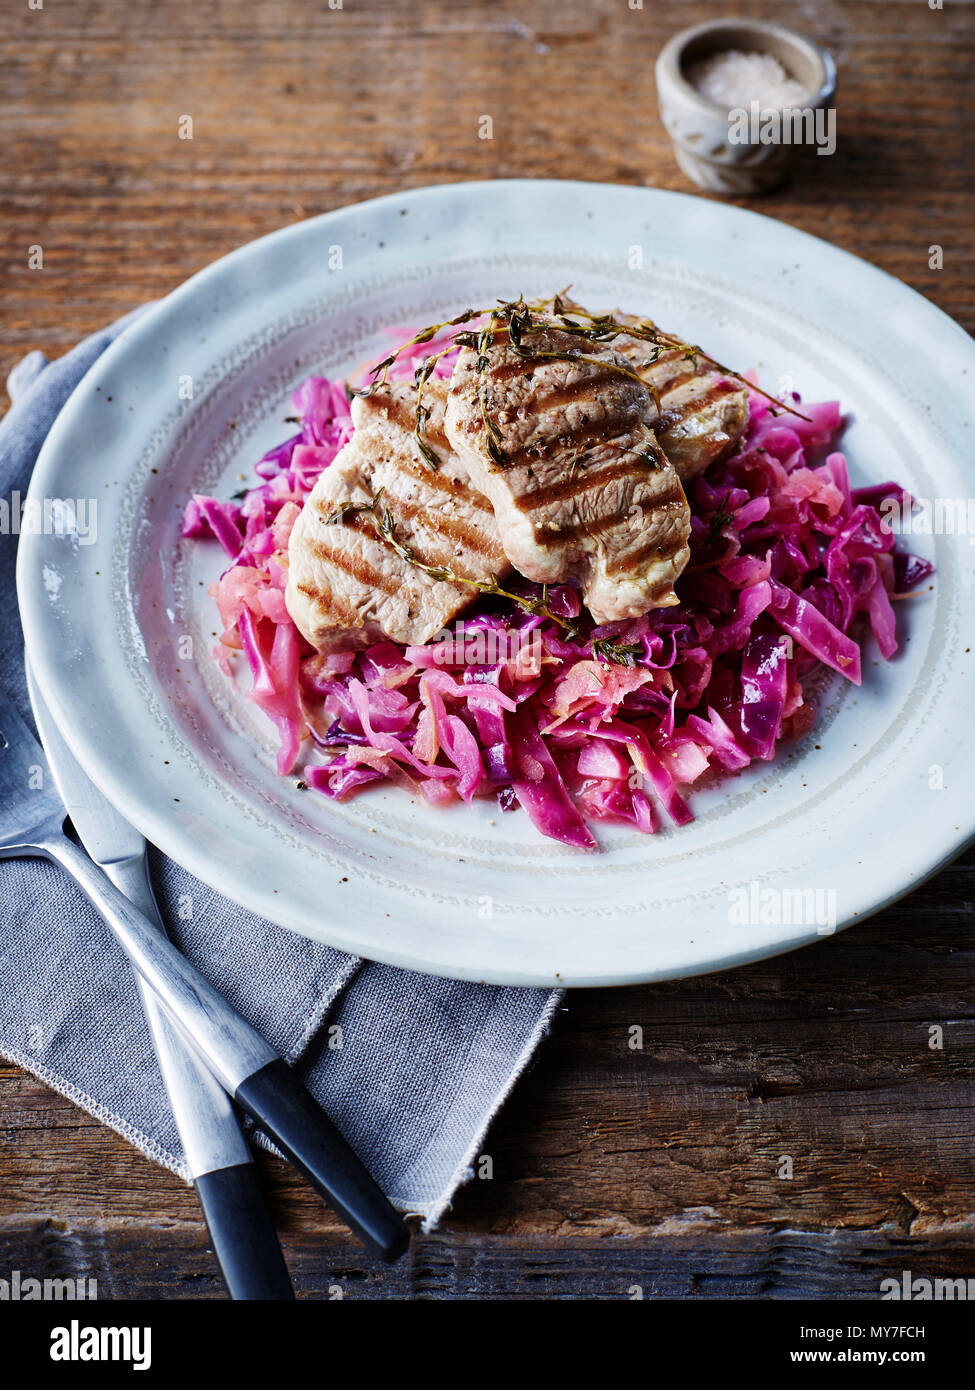 Grilled pork on braised red cabbage, close-up Stock Photo